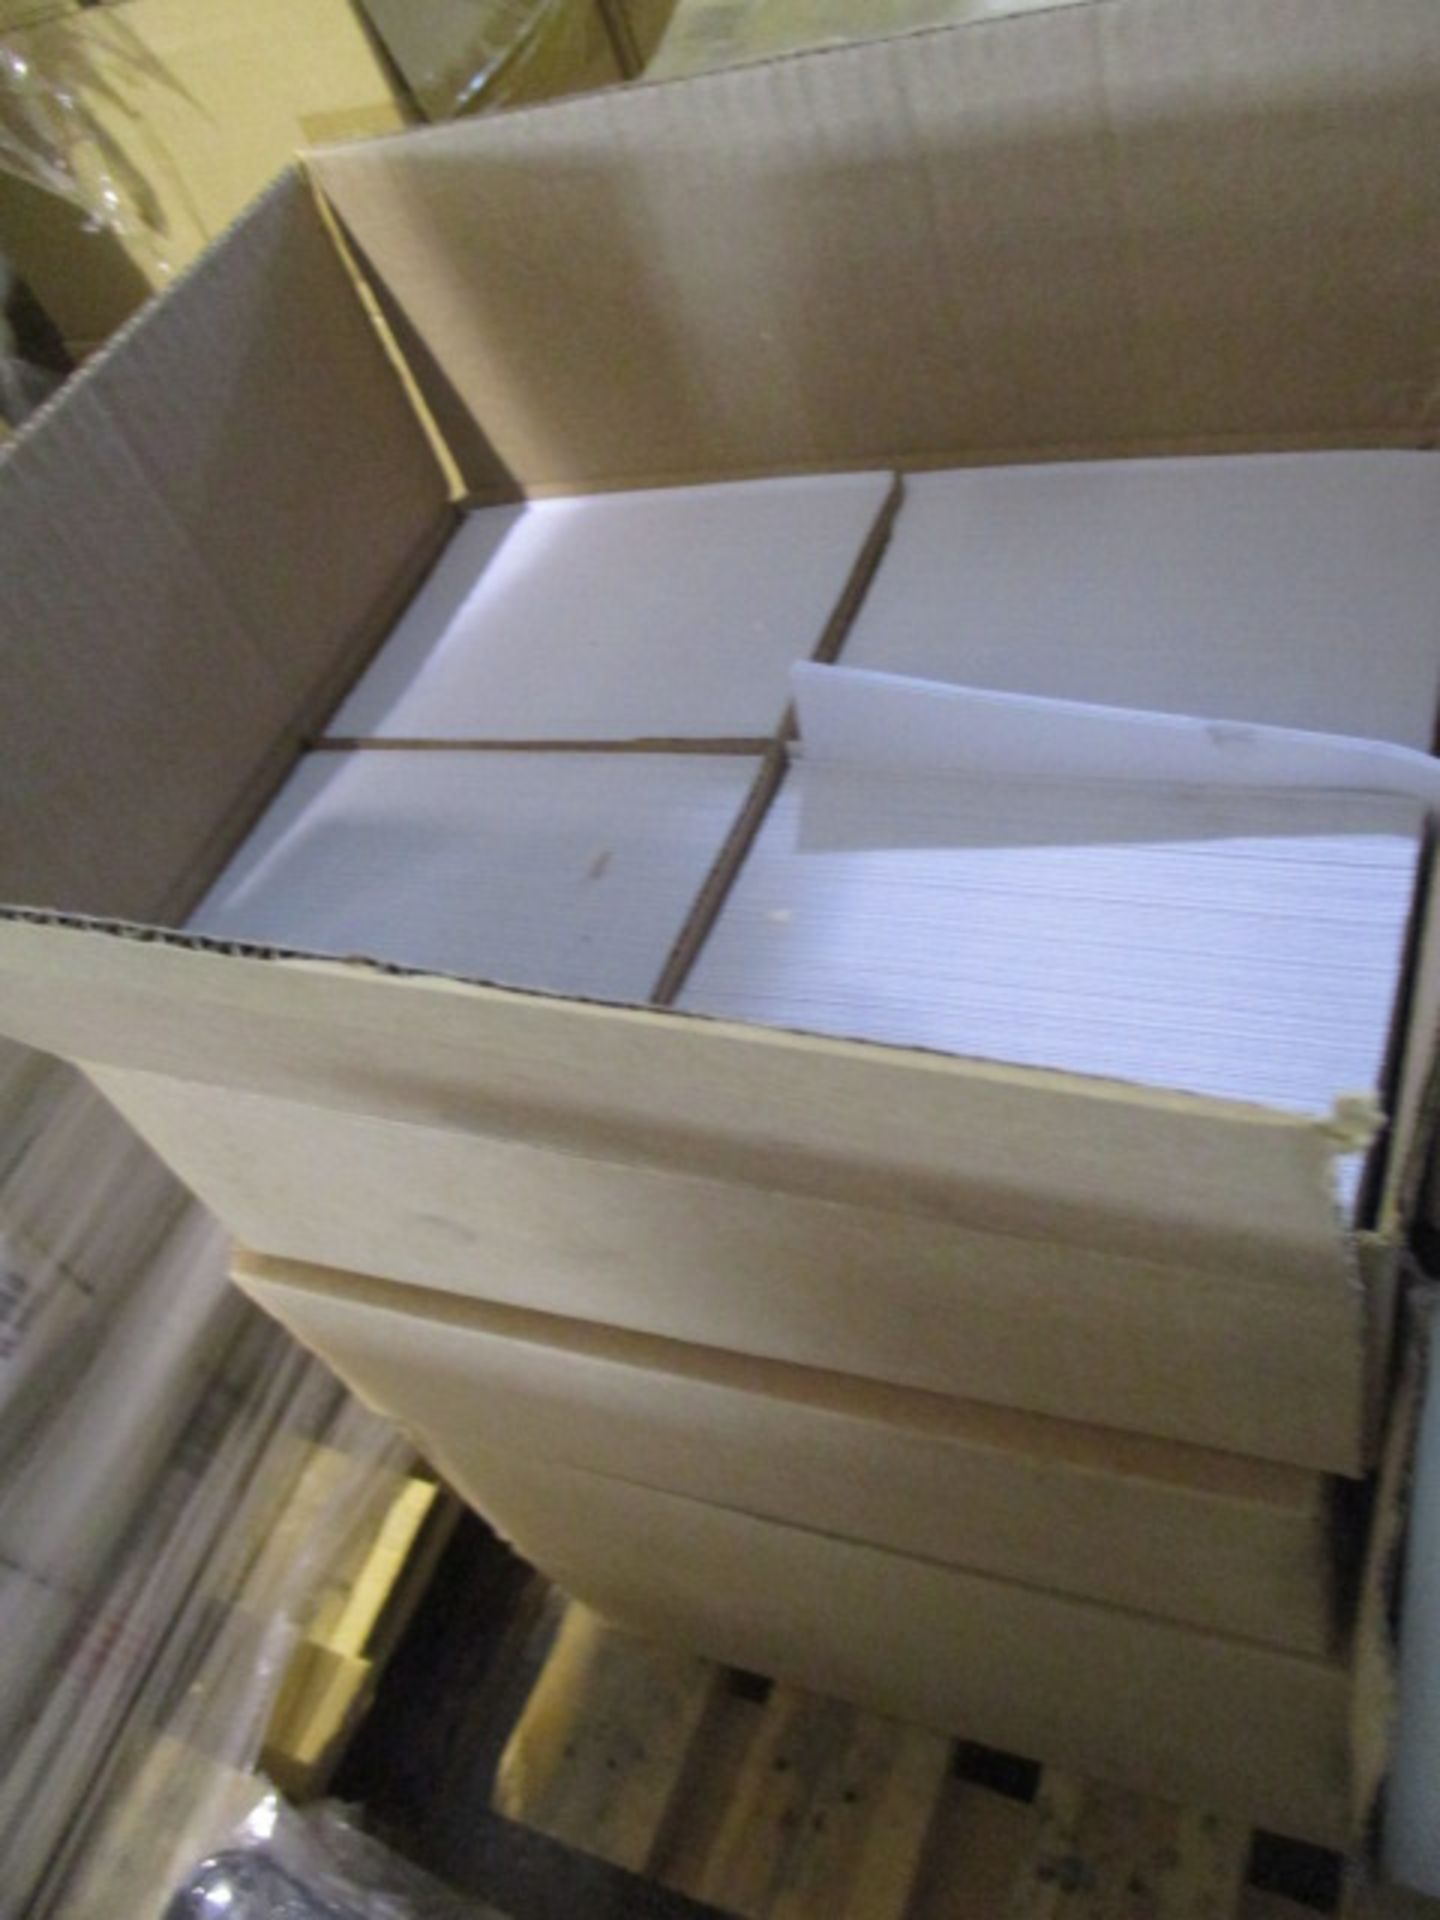 Large Quantity appx 4000 white envelopes in 4 cartons brand new factory sealed - Image 2 of 2